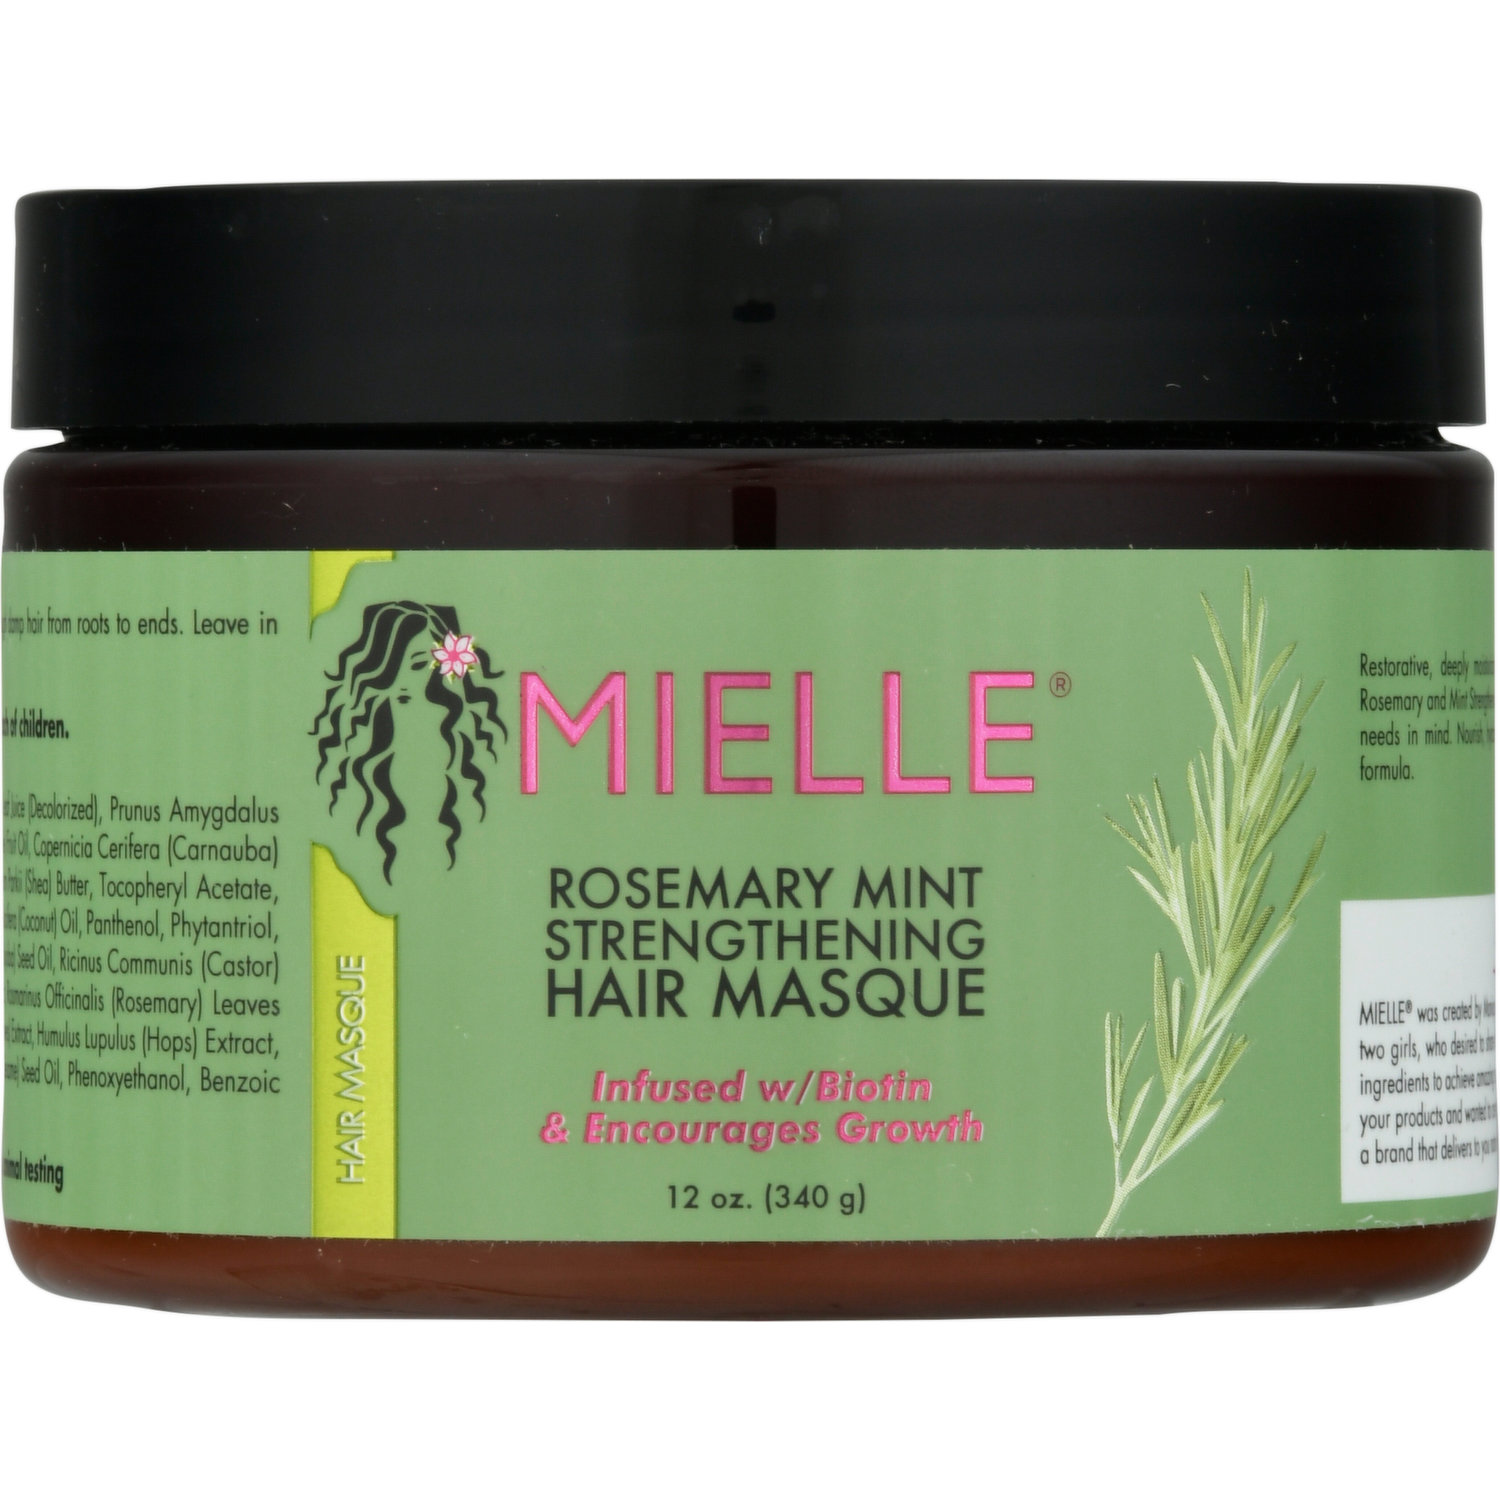 Mielle Organics Rosemary Mint Strengthening Hair Masque Review